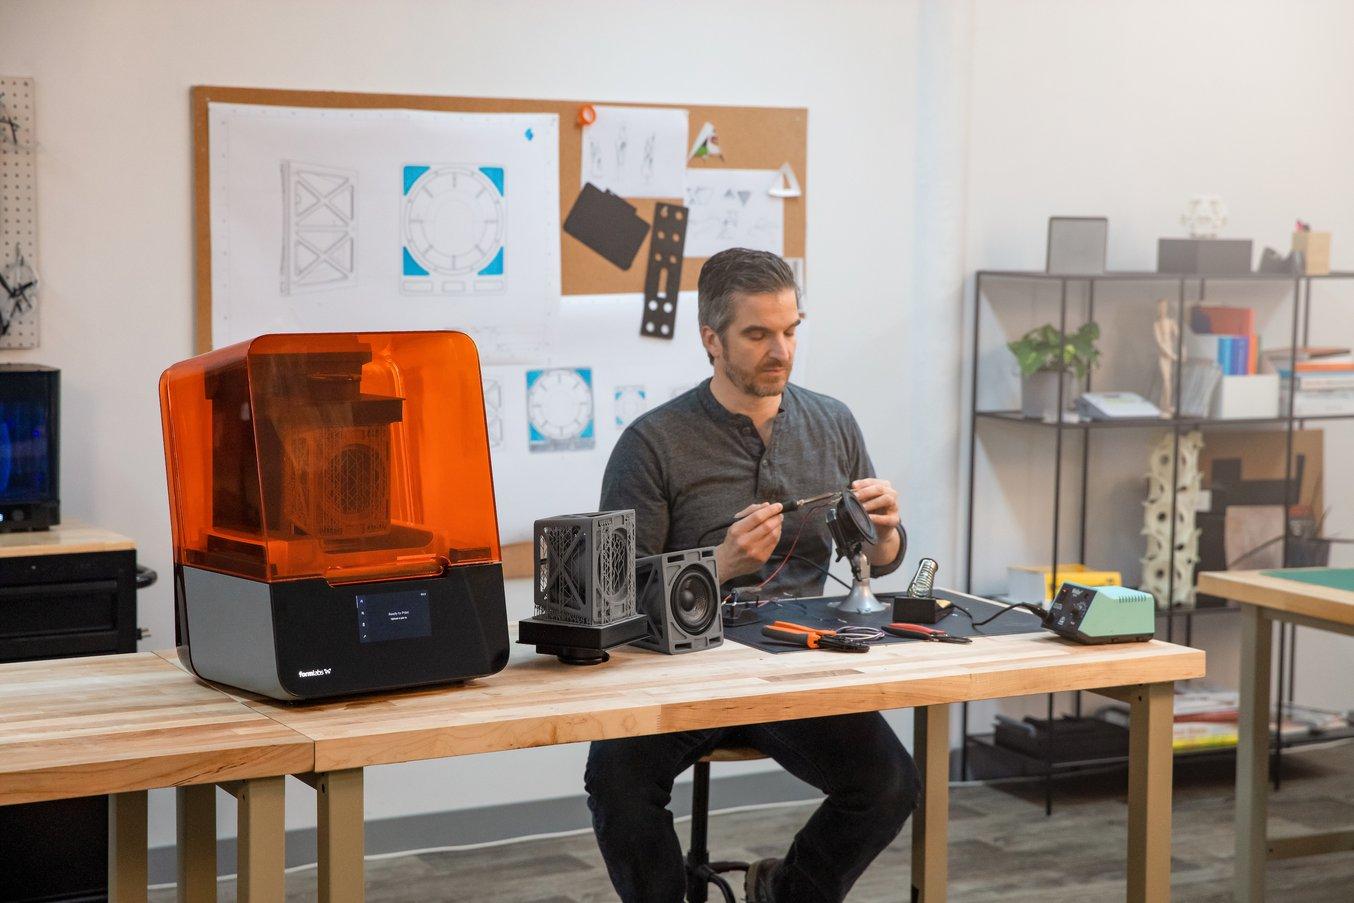 Formlabs offers two high precision SLA 3D printing systems, a growing library of specialized materials, intuitive print preparation and management software, and professional services - all in one package.